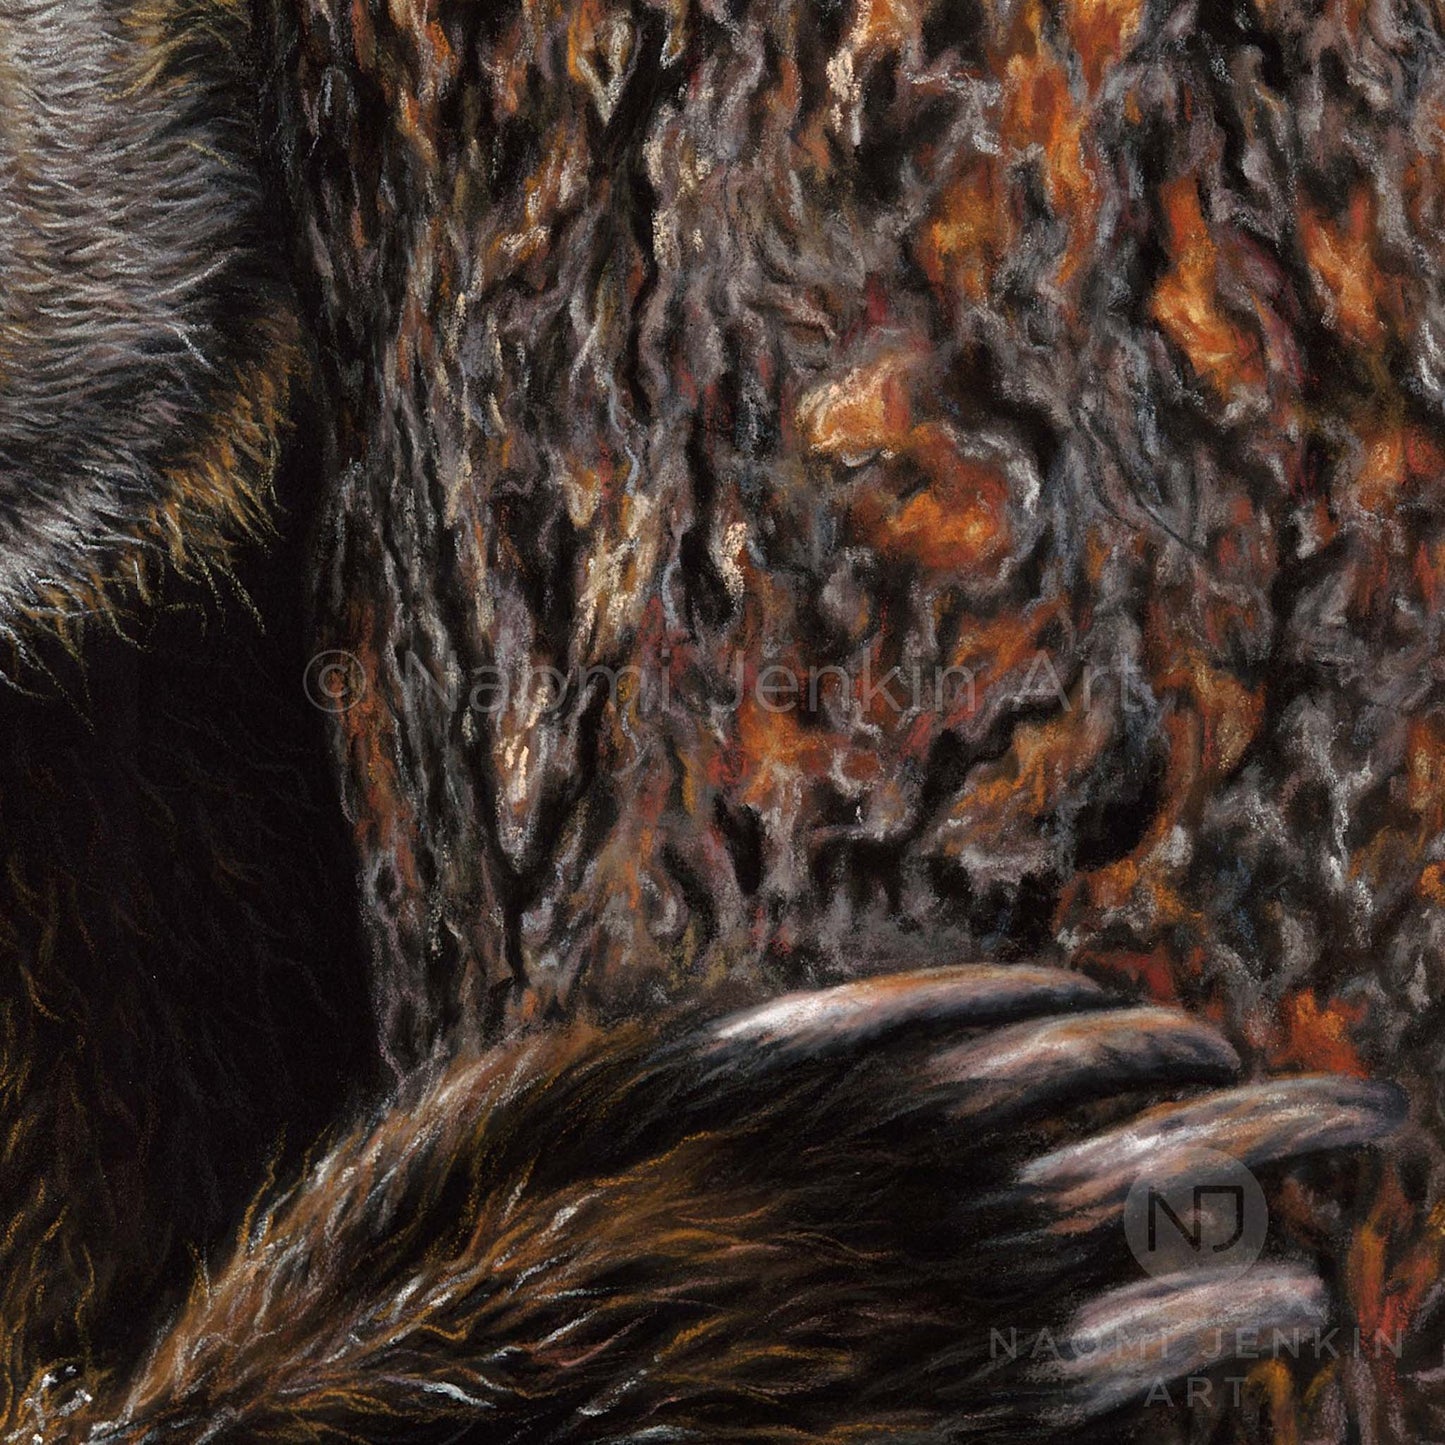 Close up wildlife art drawing of a grizzly bear's fur and paws by Naomi Jenkin Art